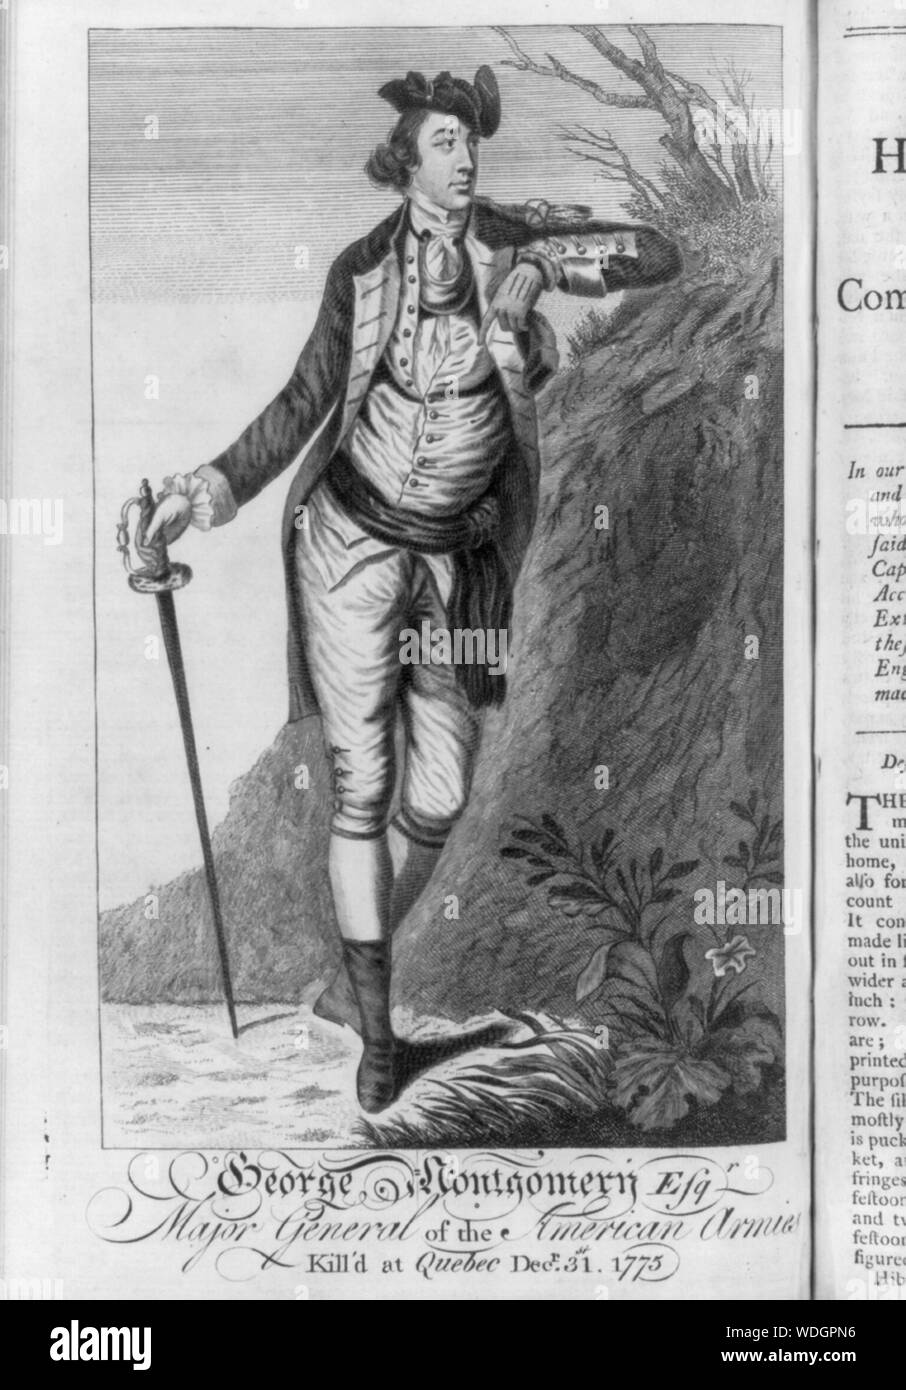 George Montgomery, Esq'r. major general of the American armies - kill'd at Quebec Decr. 31st. 1775 Abstract/medium: 1 print : engraving. Stock Photo